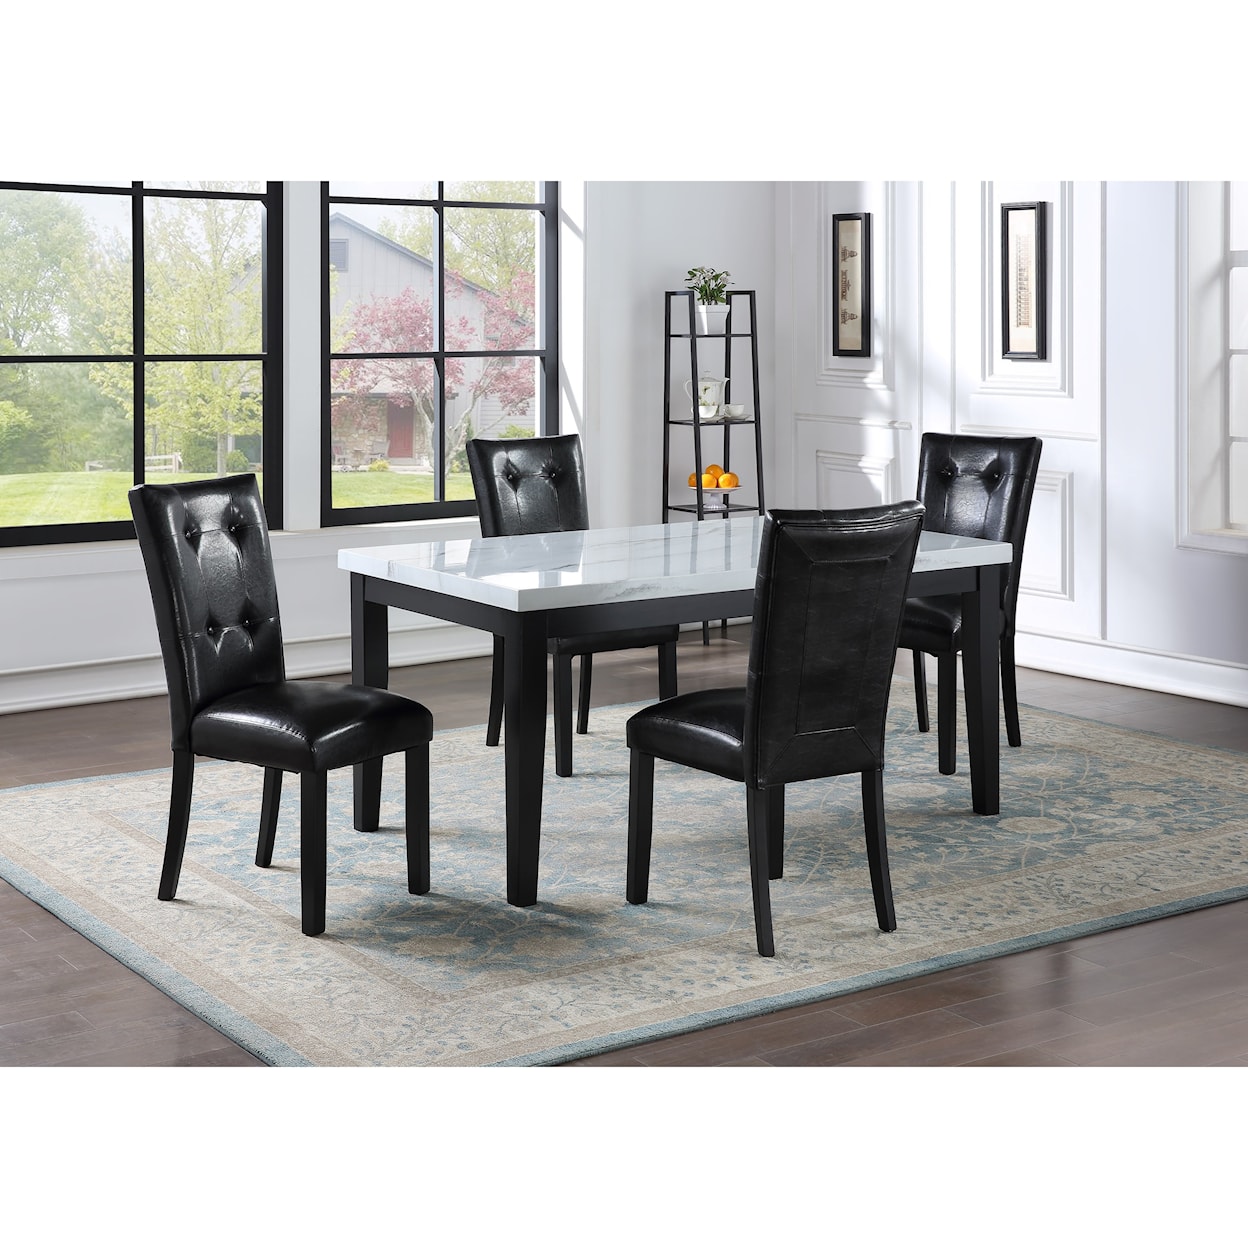 Prime Sterling 5-Piece Table and Chair Set